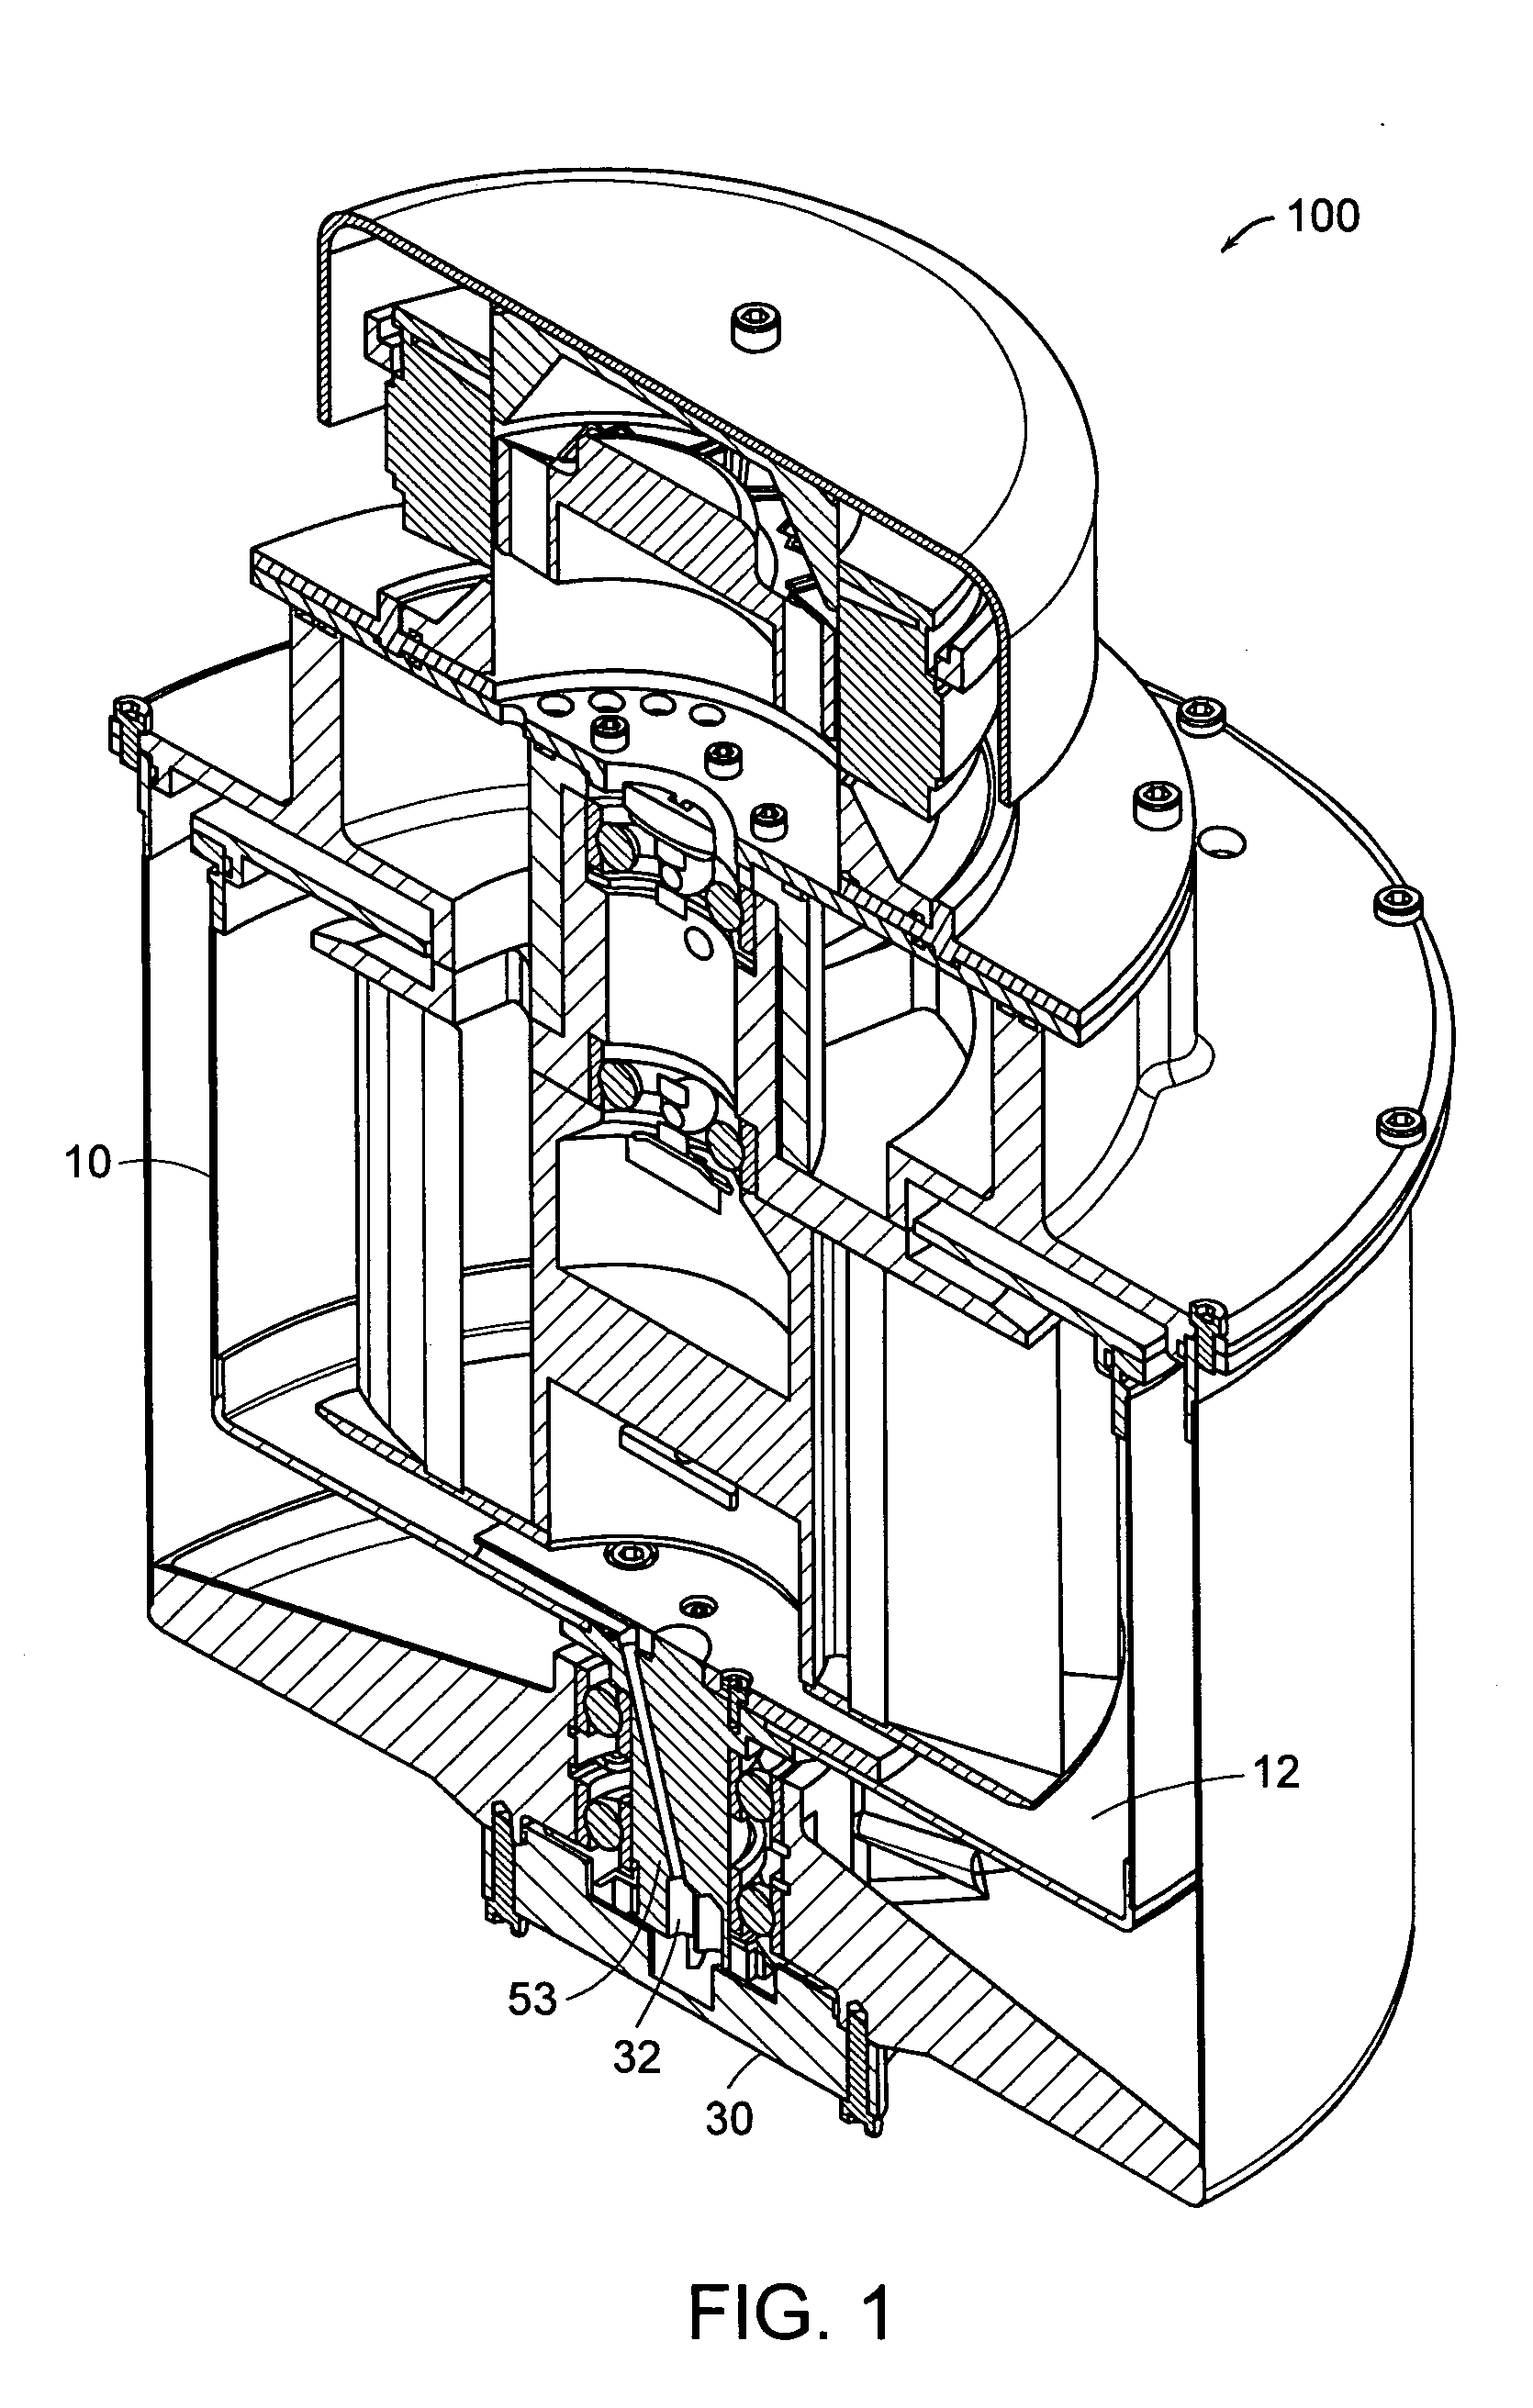 System and method of fluid transfer using devices with rotatable housings